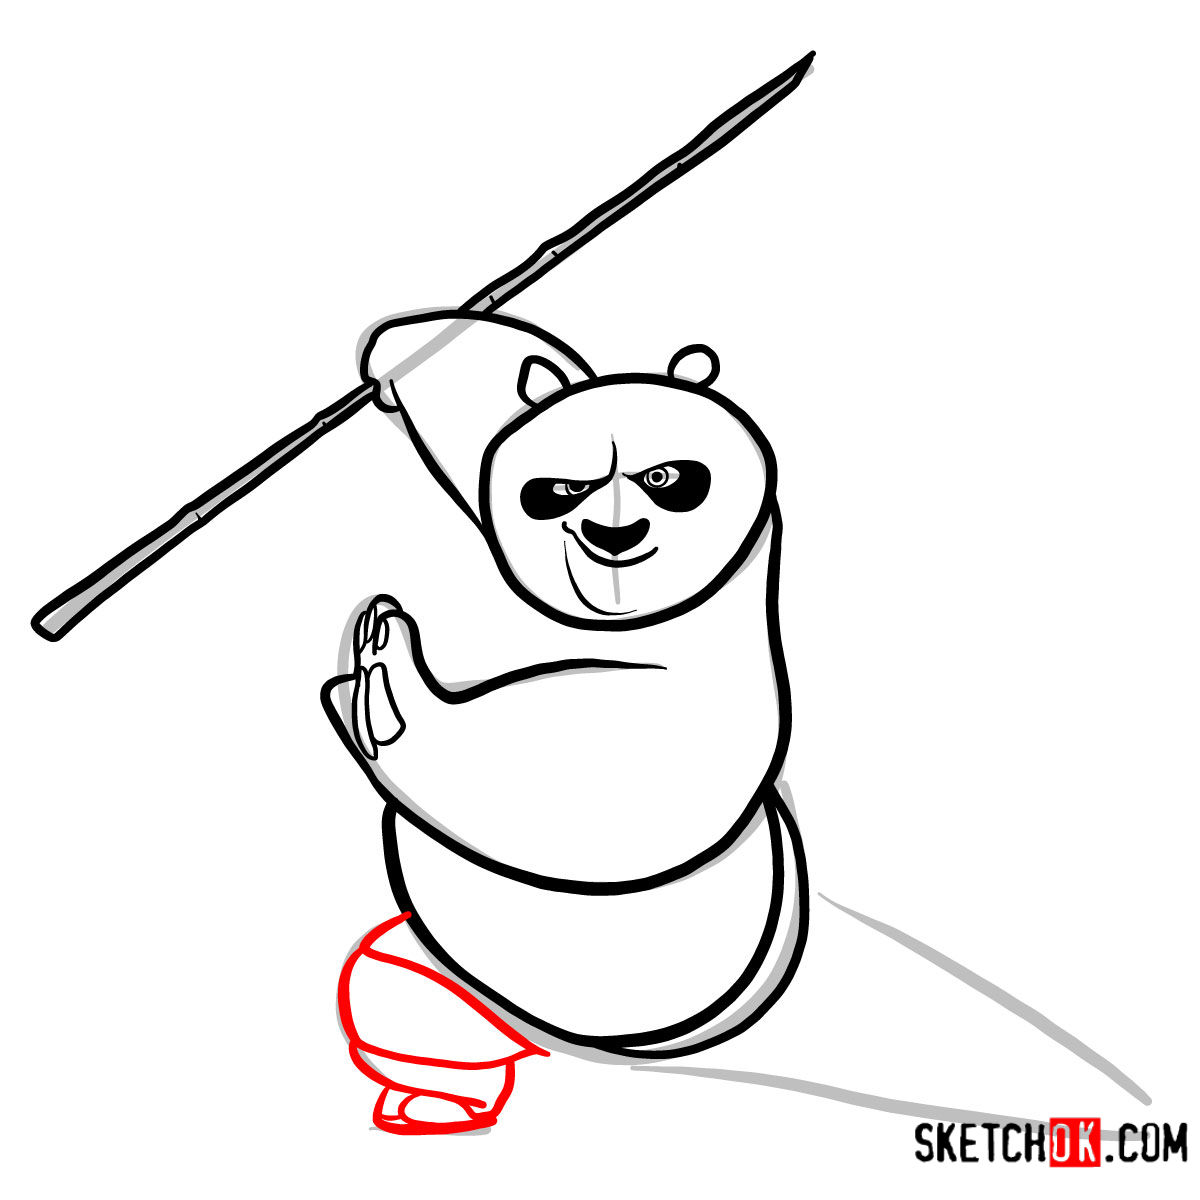 How to draw Po the Kung Fu Panda - step 08